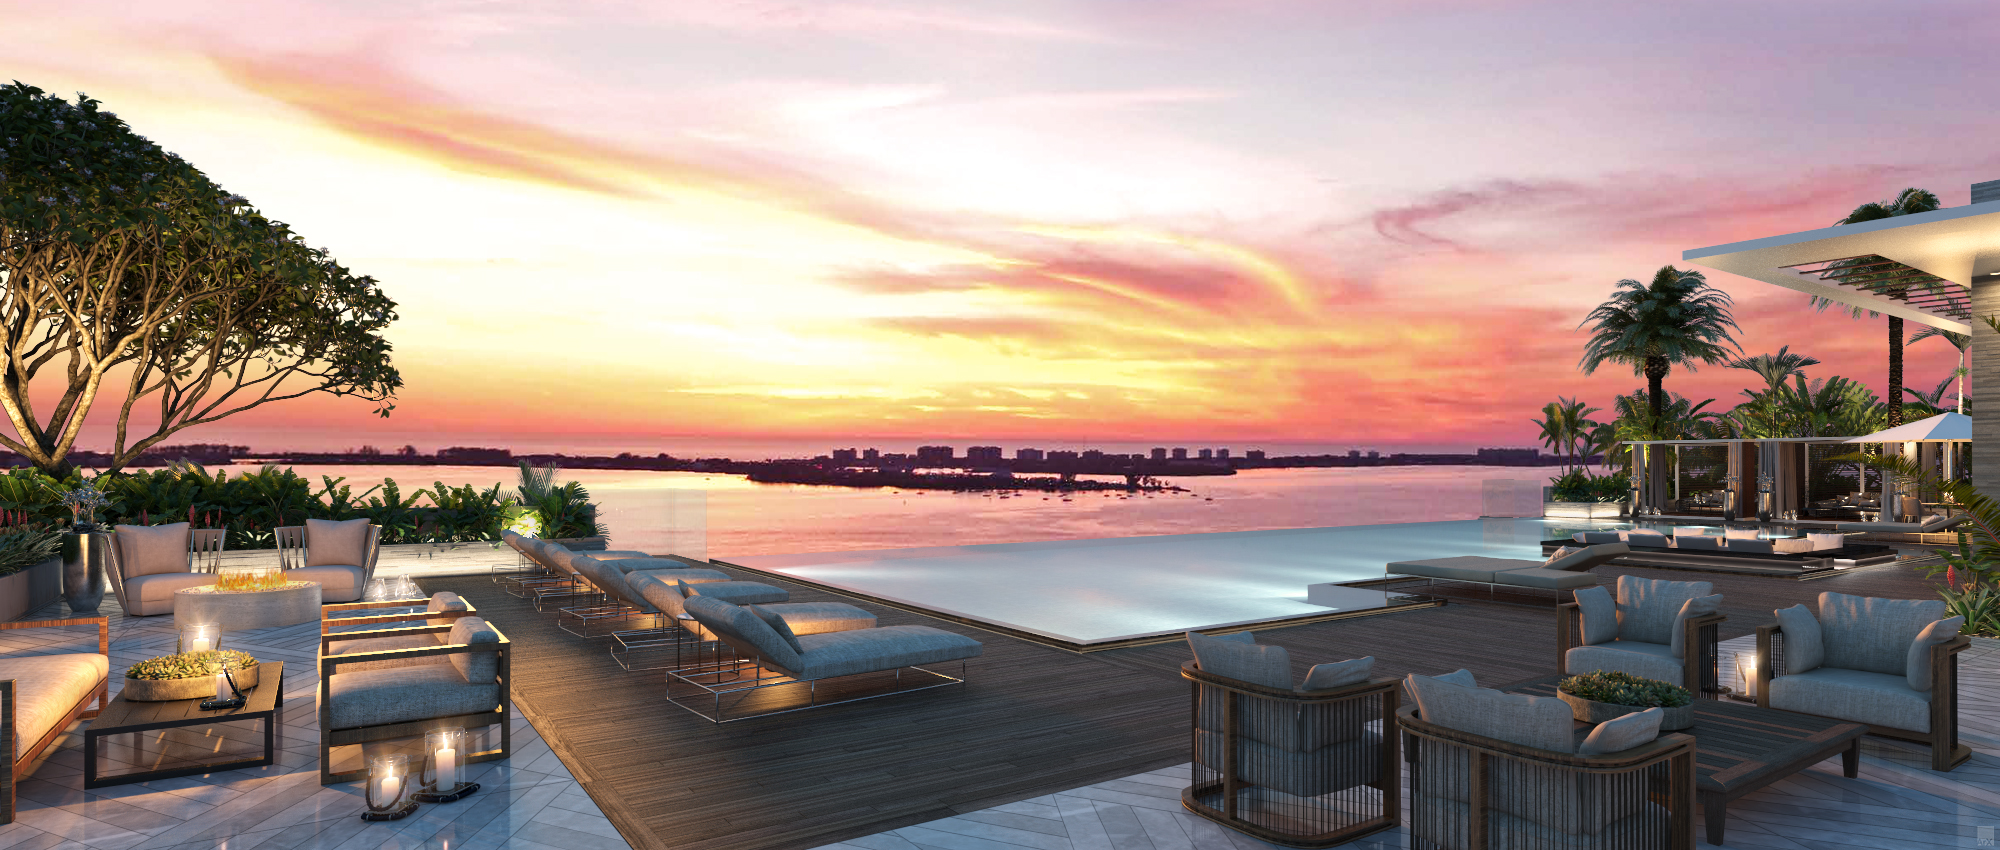 Deluxe amenities will include a tropically-landscaped rooftop pool overlooking Sarasota Bay